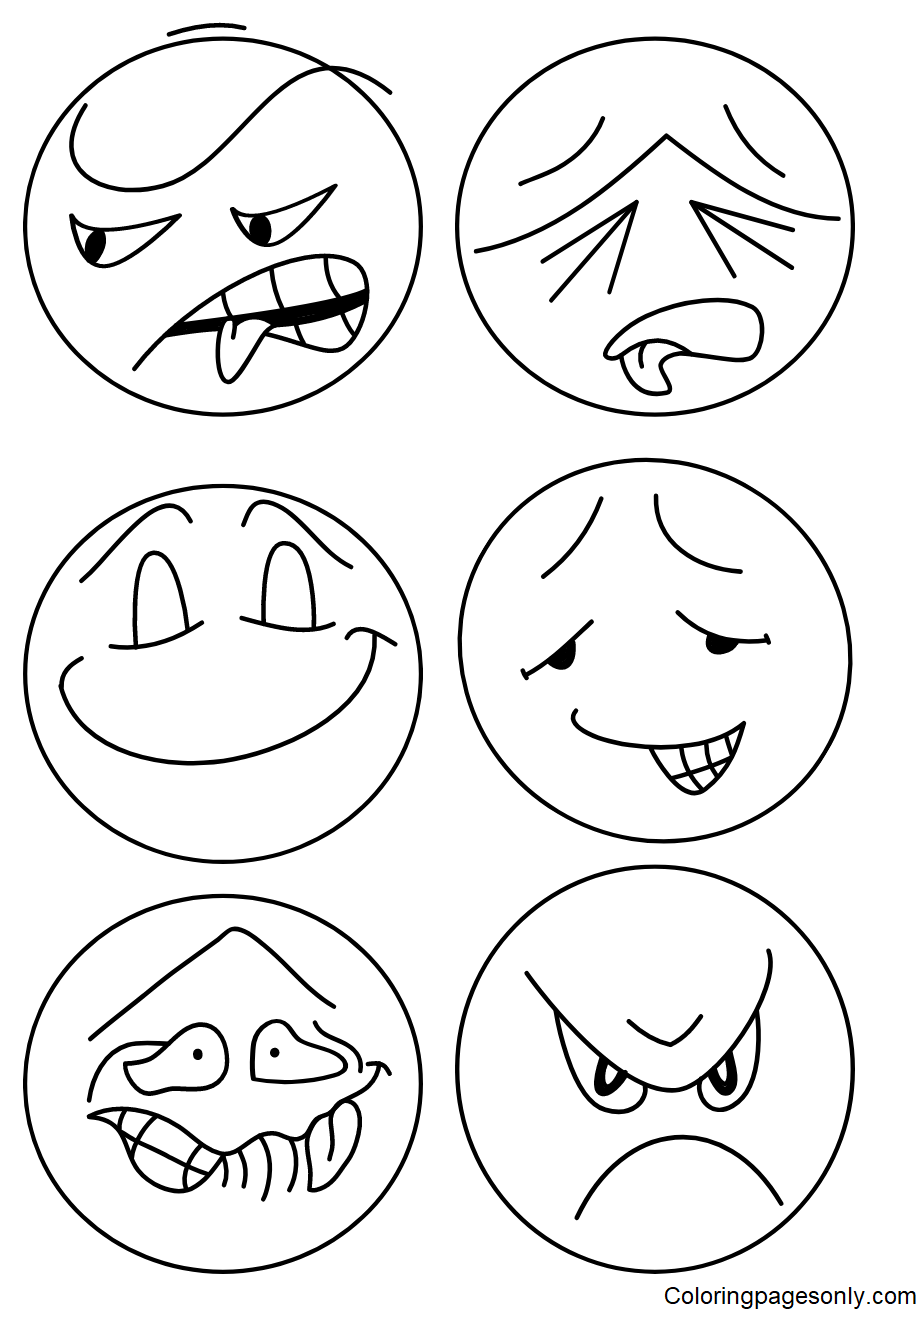 Emotions coloring pages printable for free download